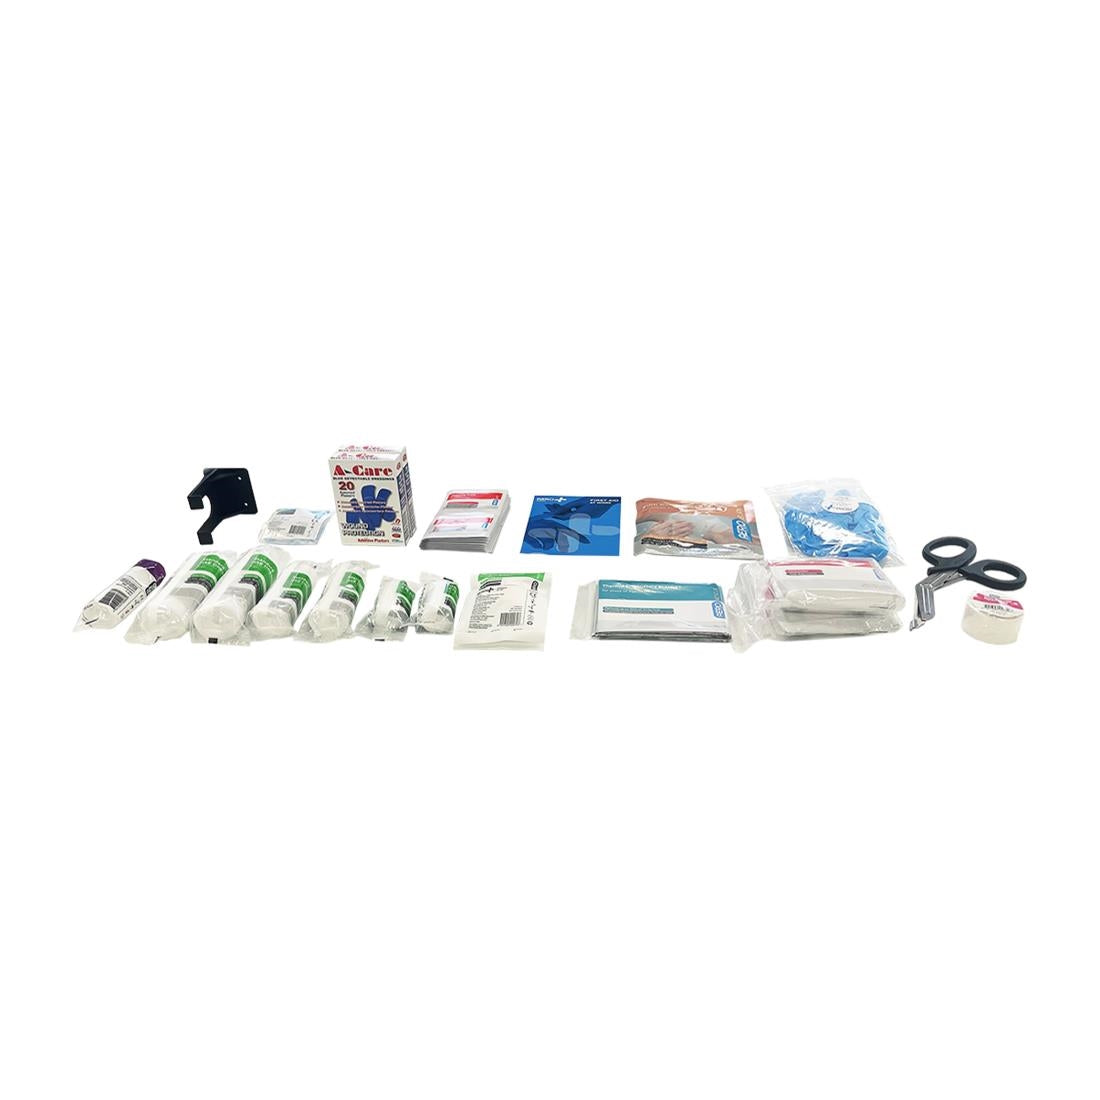 FT591 Aero Aerokit BS 8599 Small Catering First Aid Kit Refill JD Catering Equipment Solutions Ltd